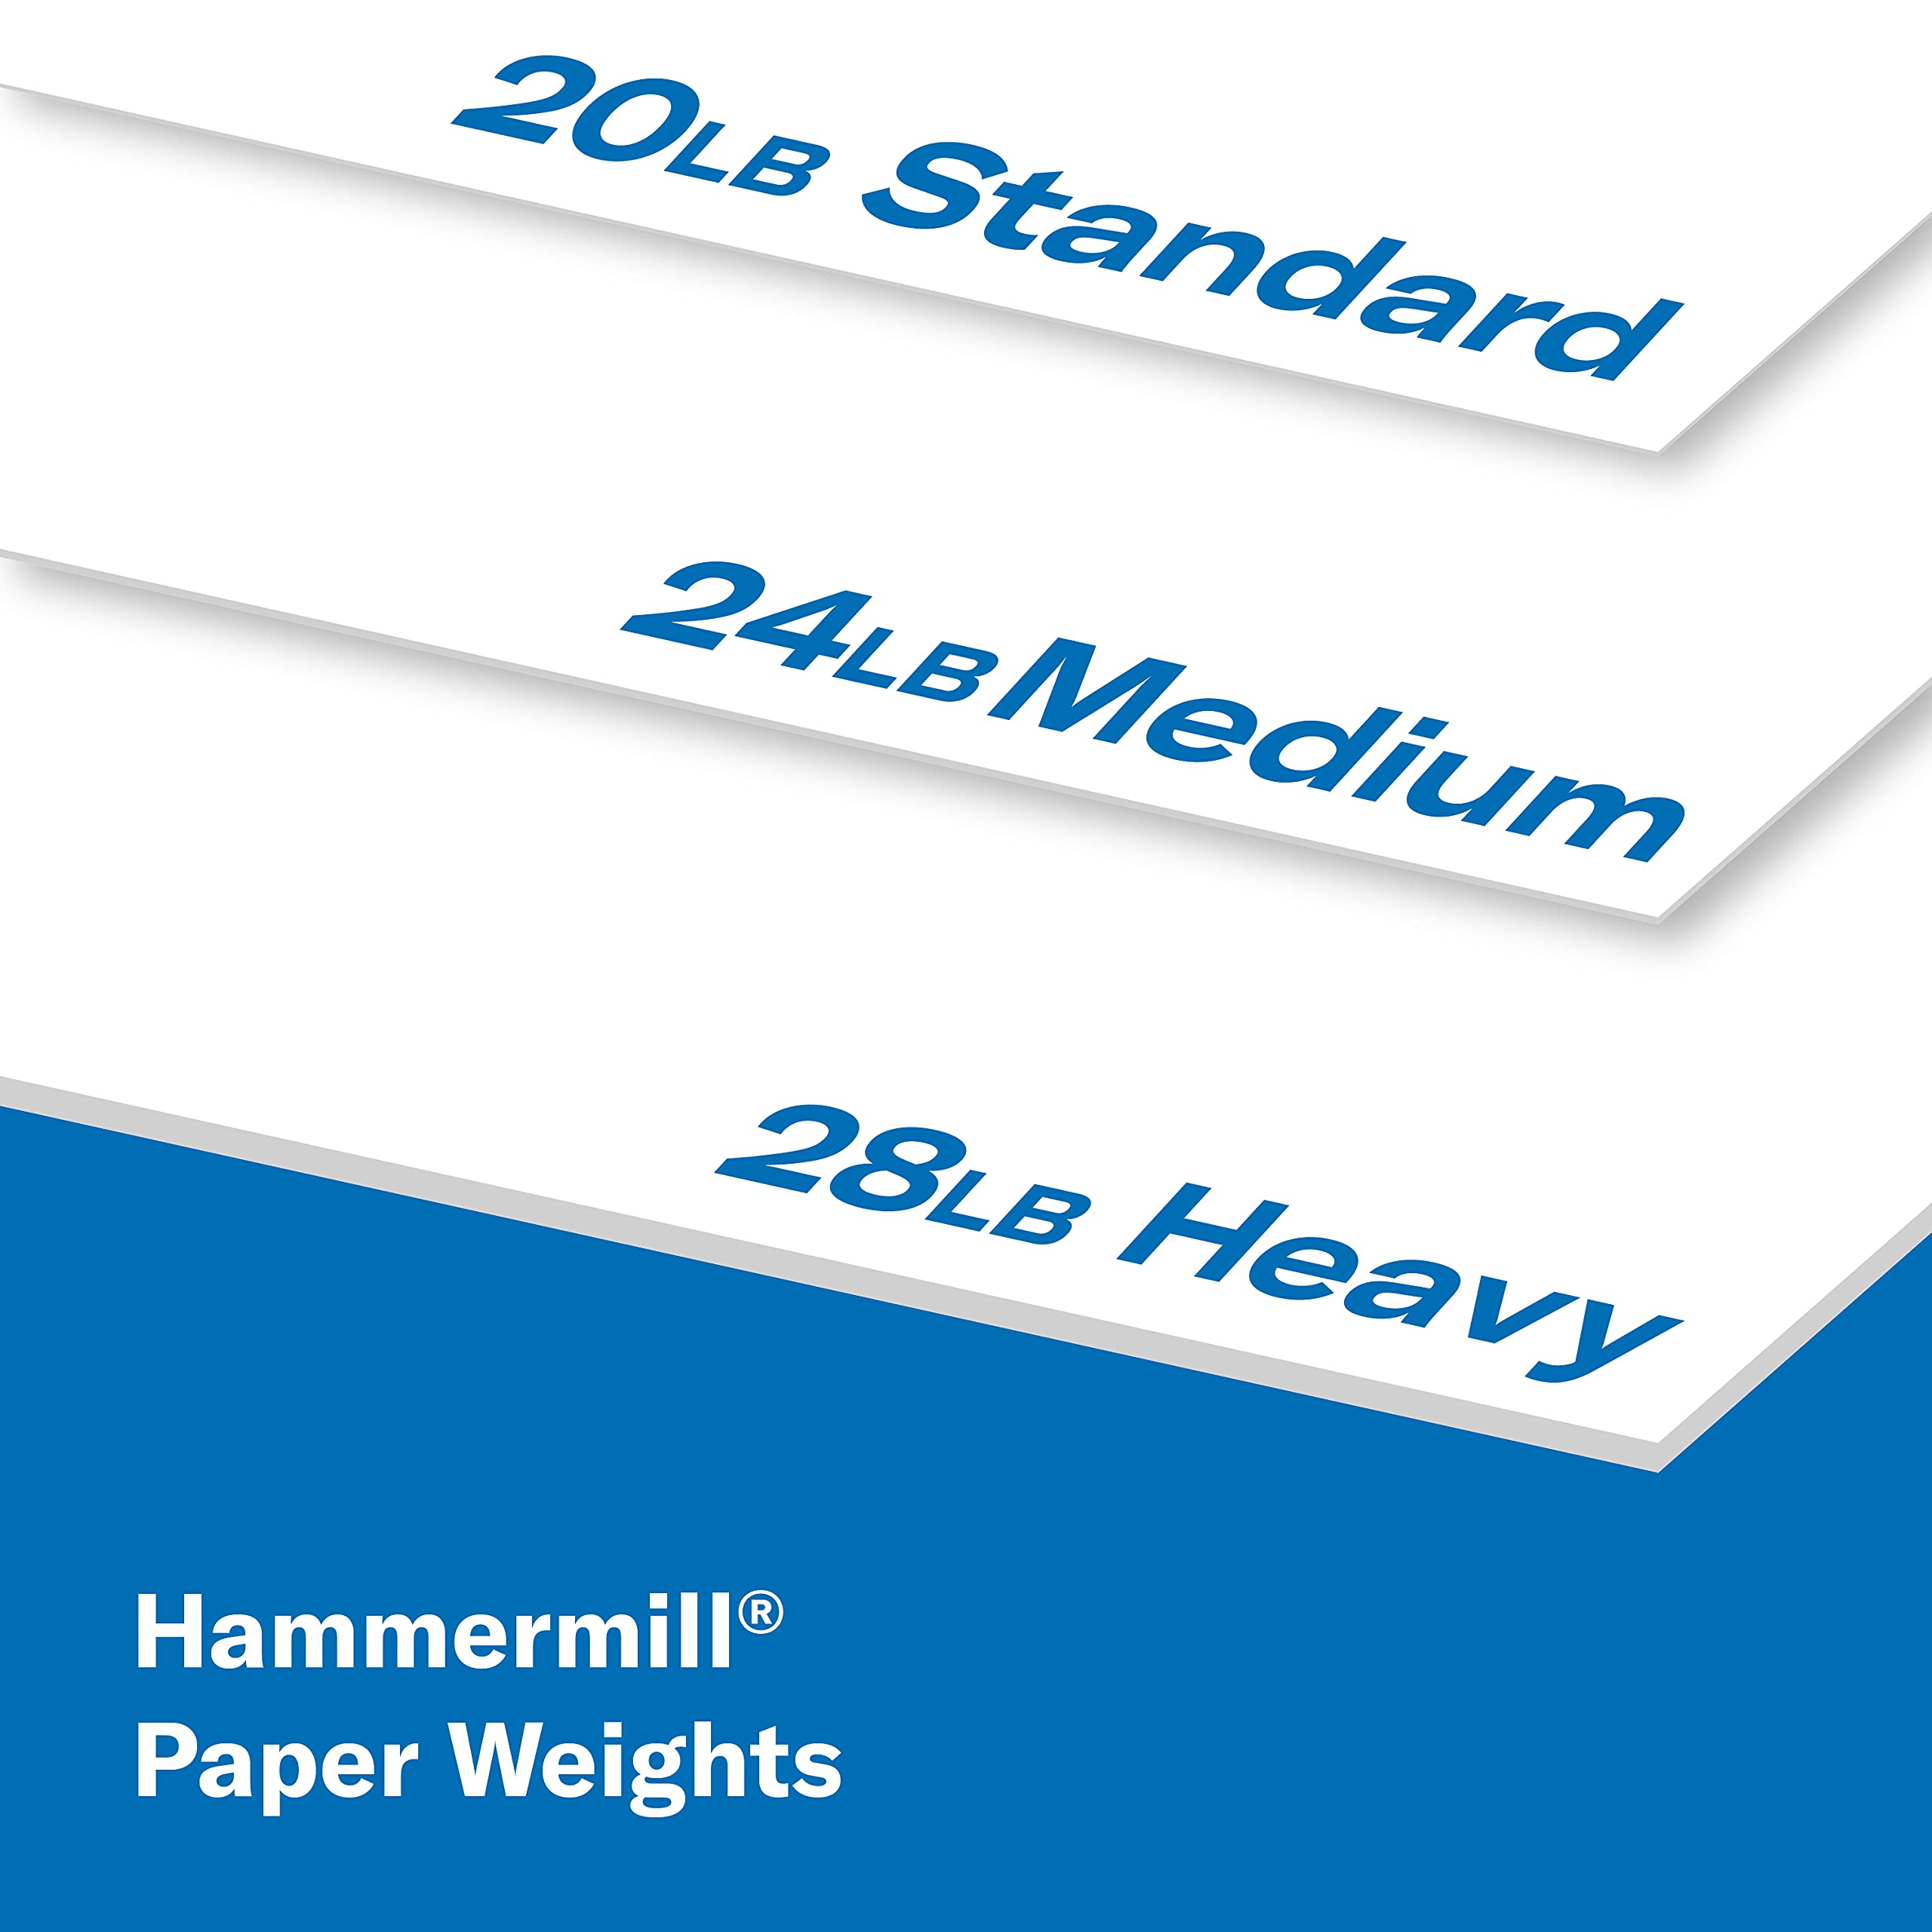 Hammermill Printer Paper, 20 Lb Copy Paper, 8.5 x 14 - 500 Sheets (Pack of 3) - 92 Bright, Made in the USA